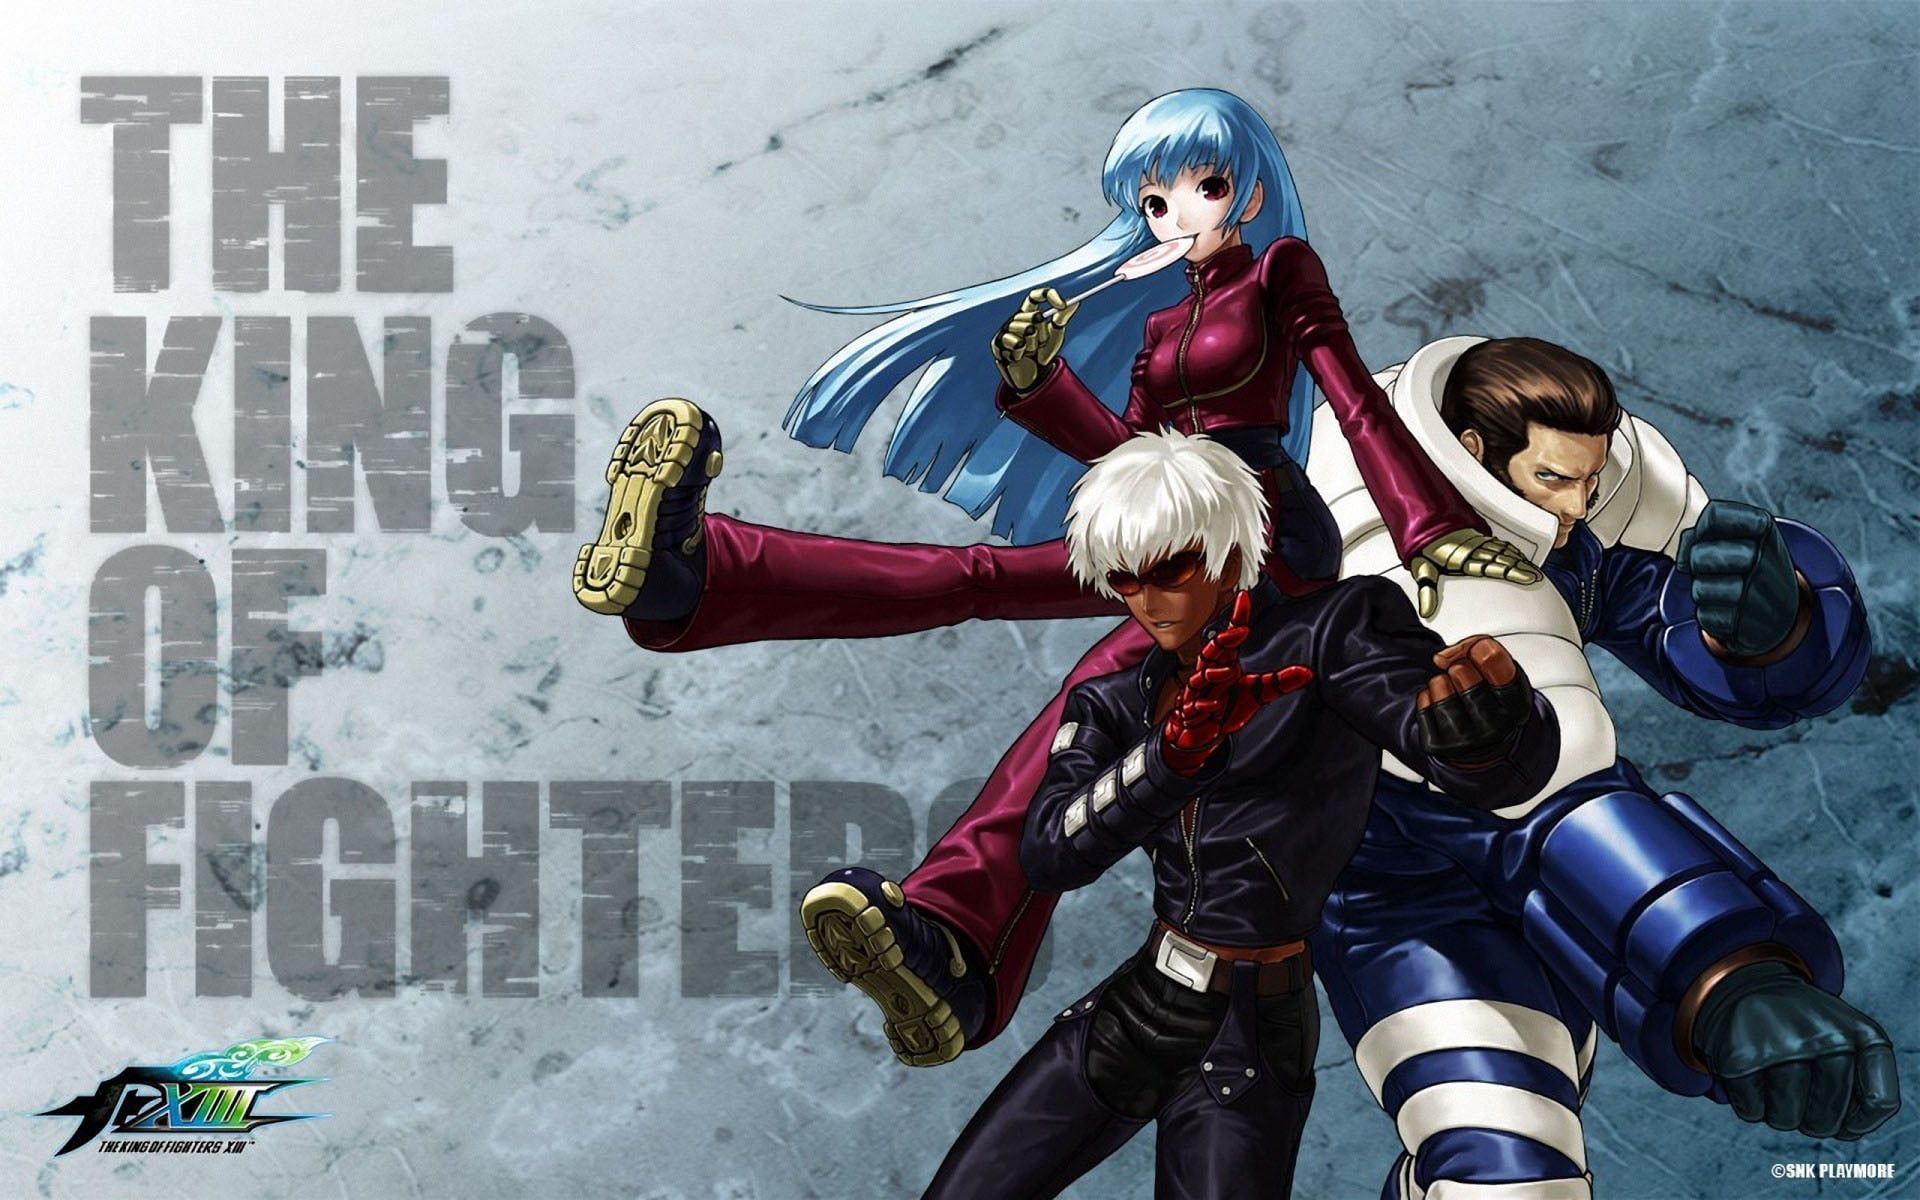 The King Of Fighters XII, The King of Fighter wallpaper #Games The King of Fighters P #wallpaper #hdwall. King of fighters, Fighter, The lion king characters